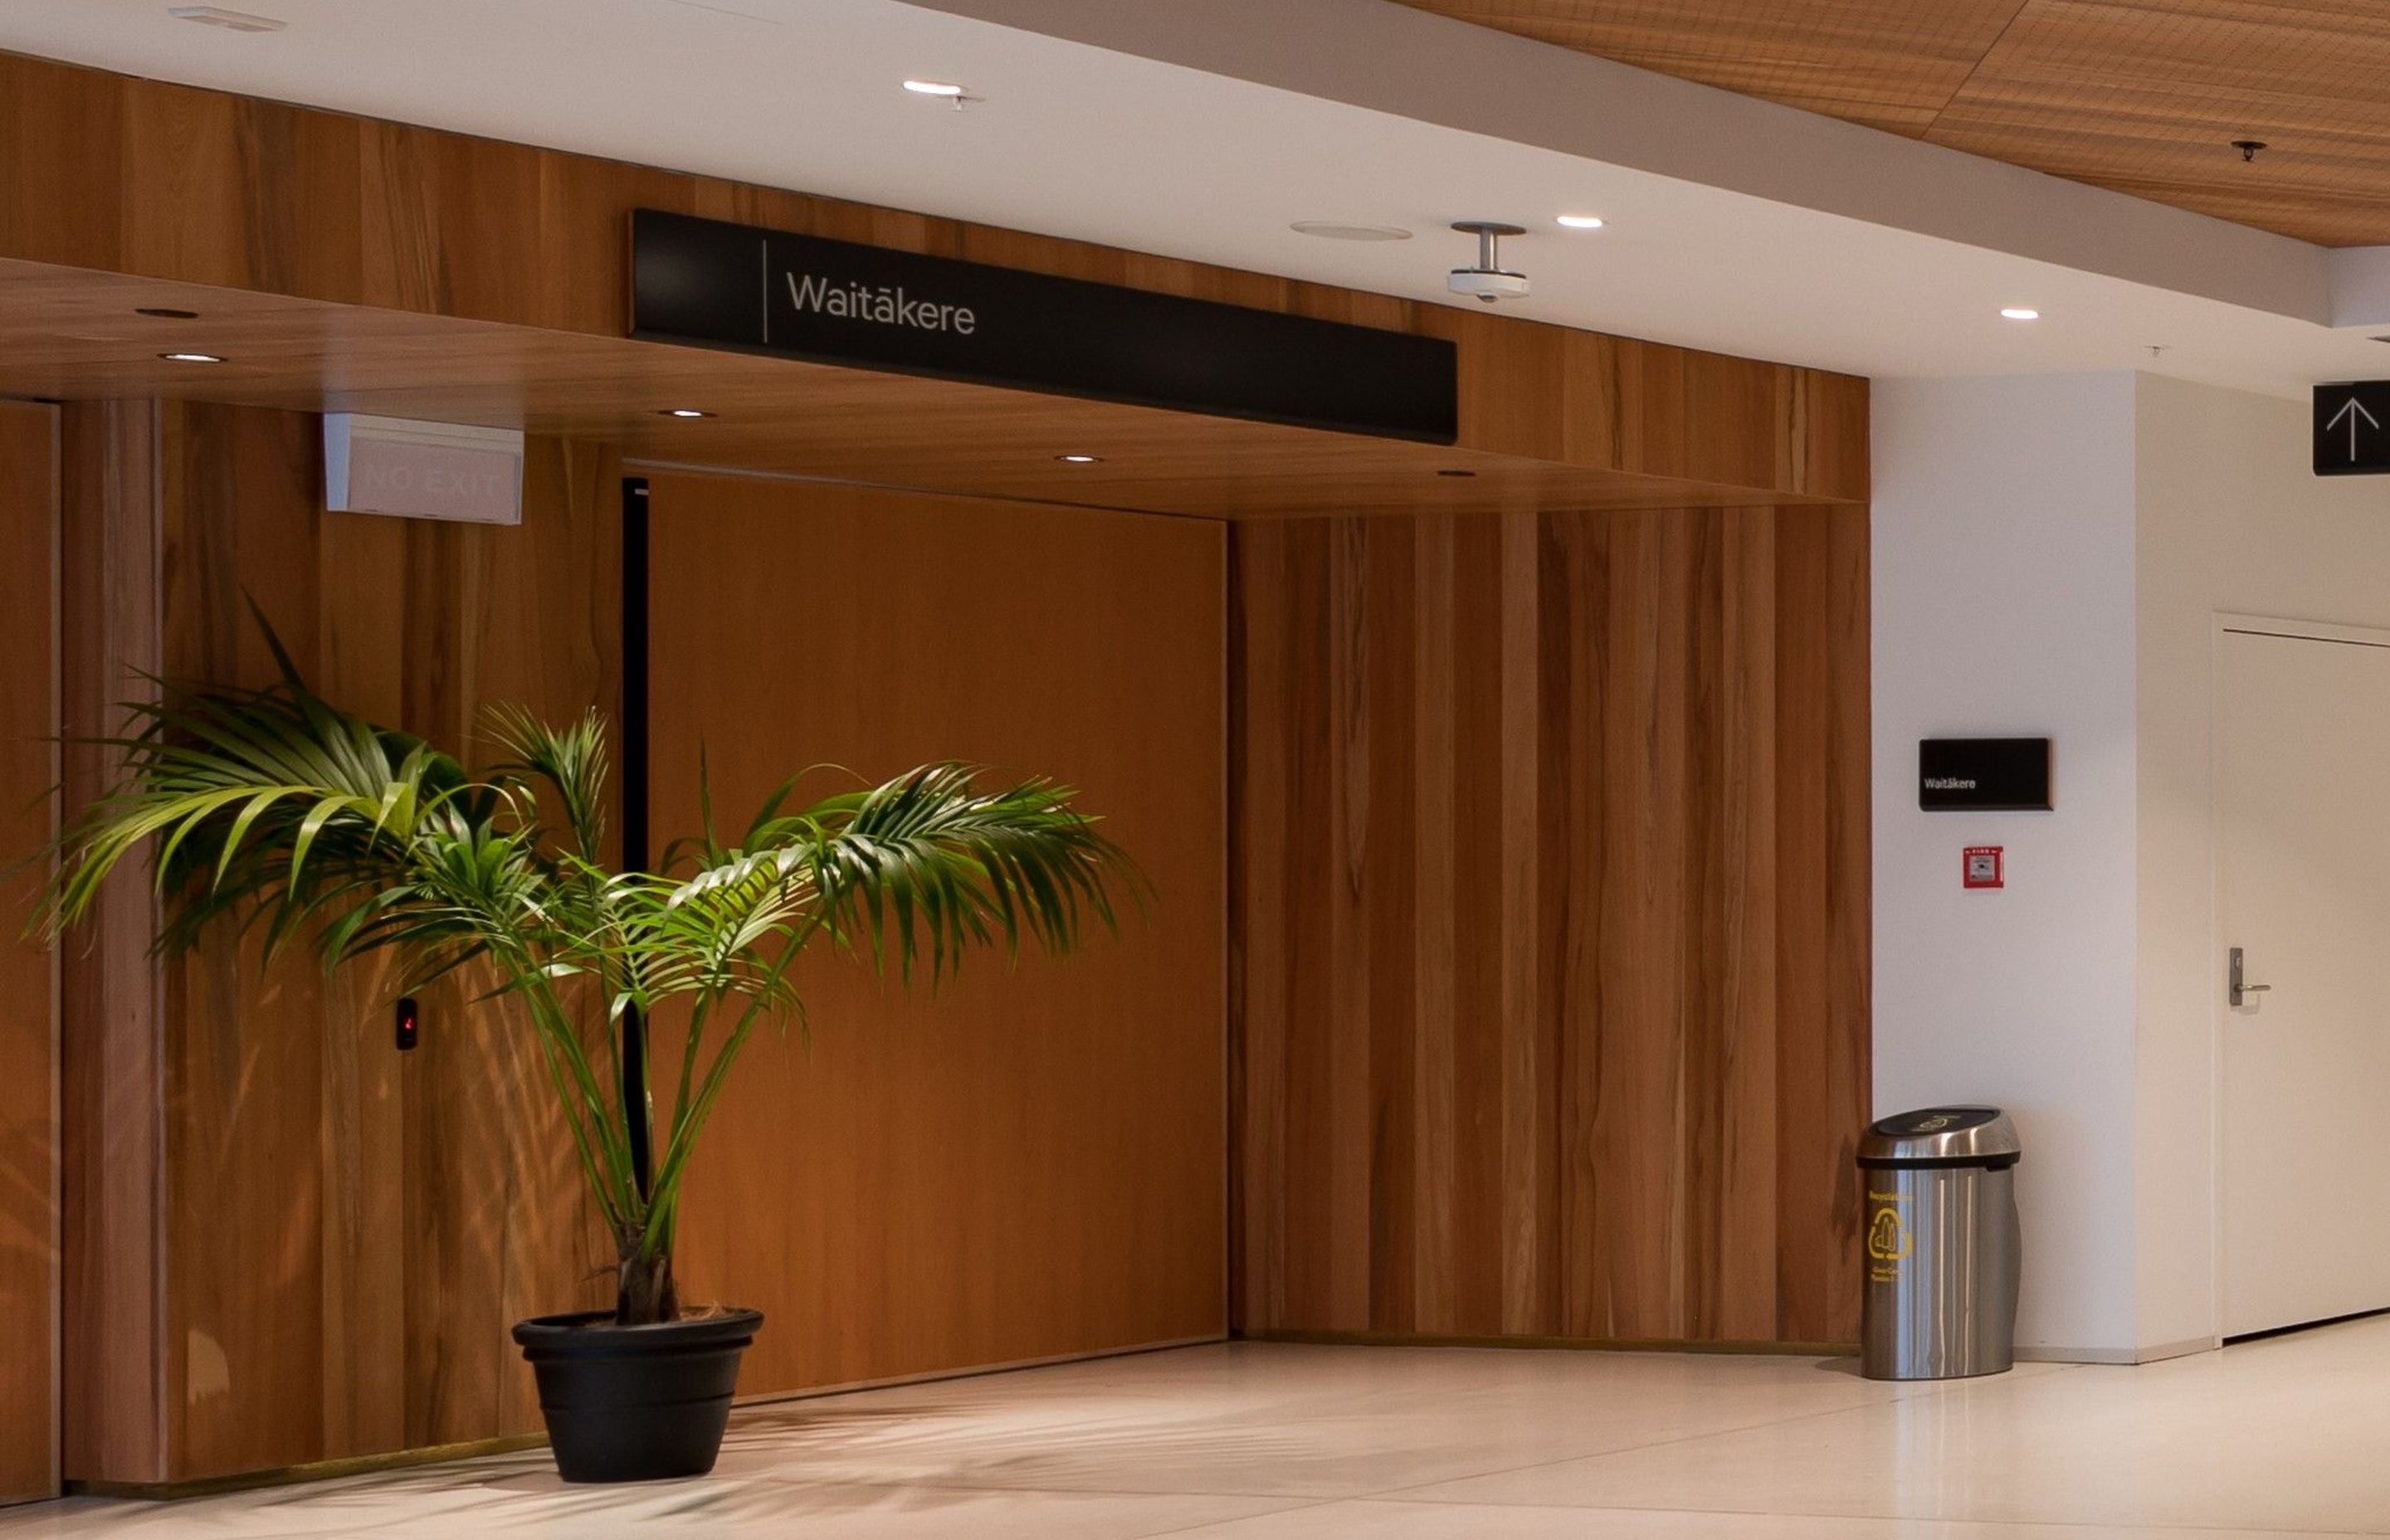 Rimu veneer panels were chosen to add visual interest and contrast inside Auckland's Aotea Centre.